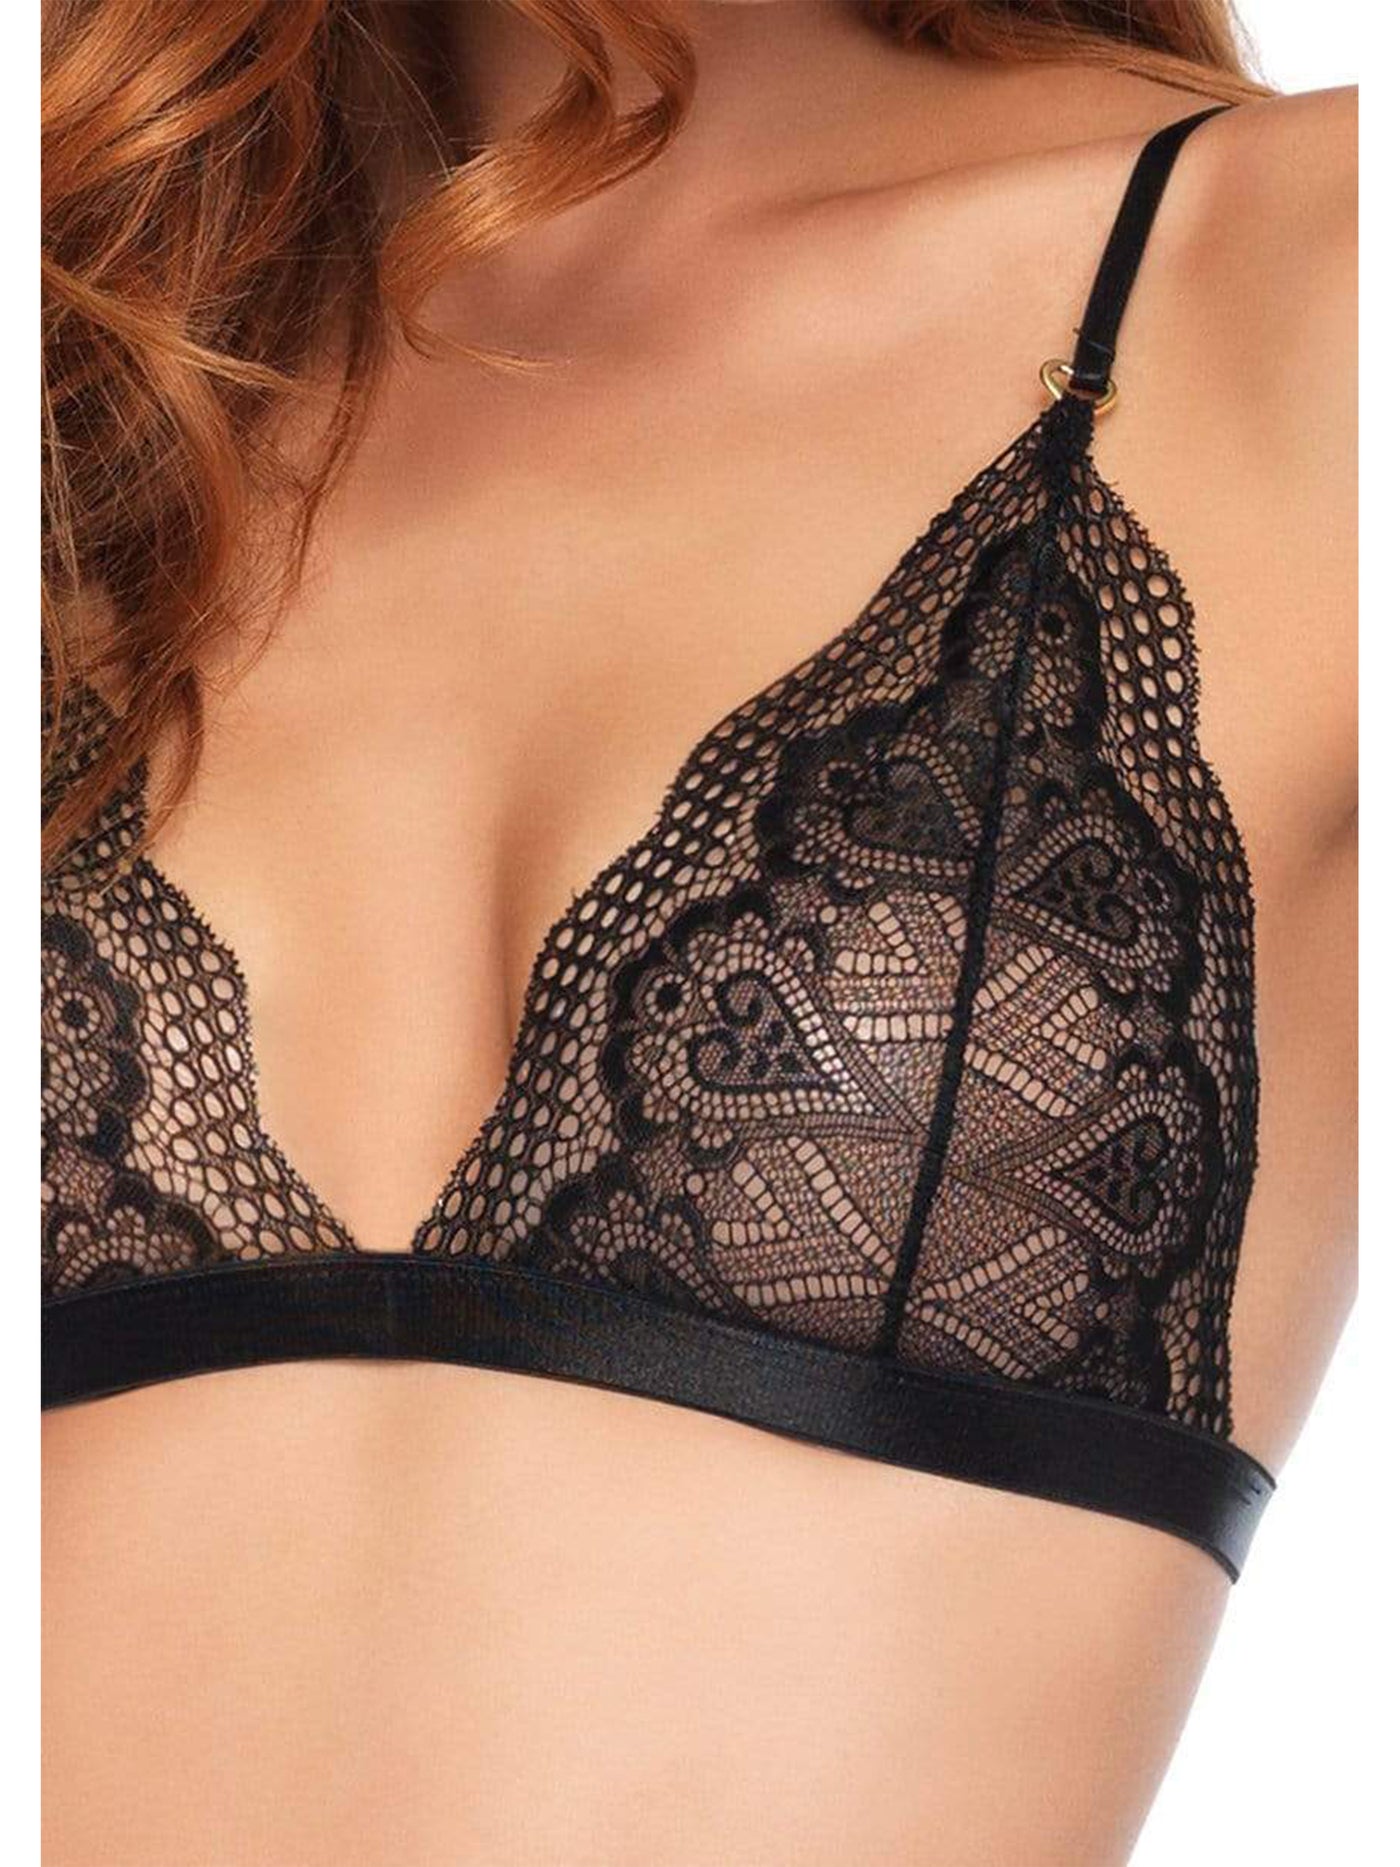 Yours Tonight 2pc Sweetheart Scalloped Lace Bralette & Panty set - Costumes & Lingerie Australia